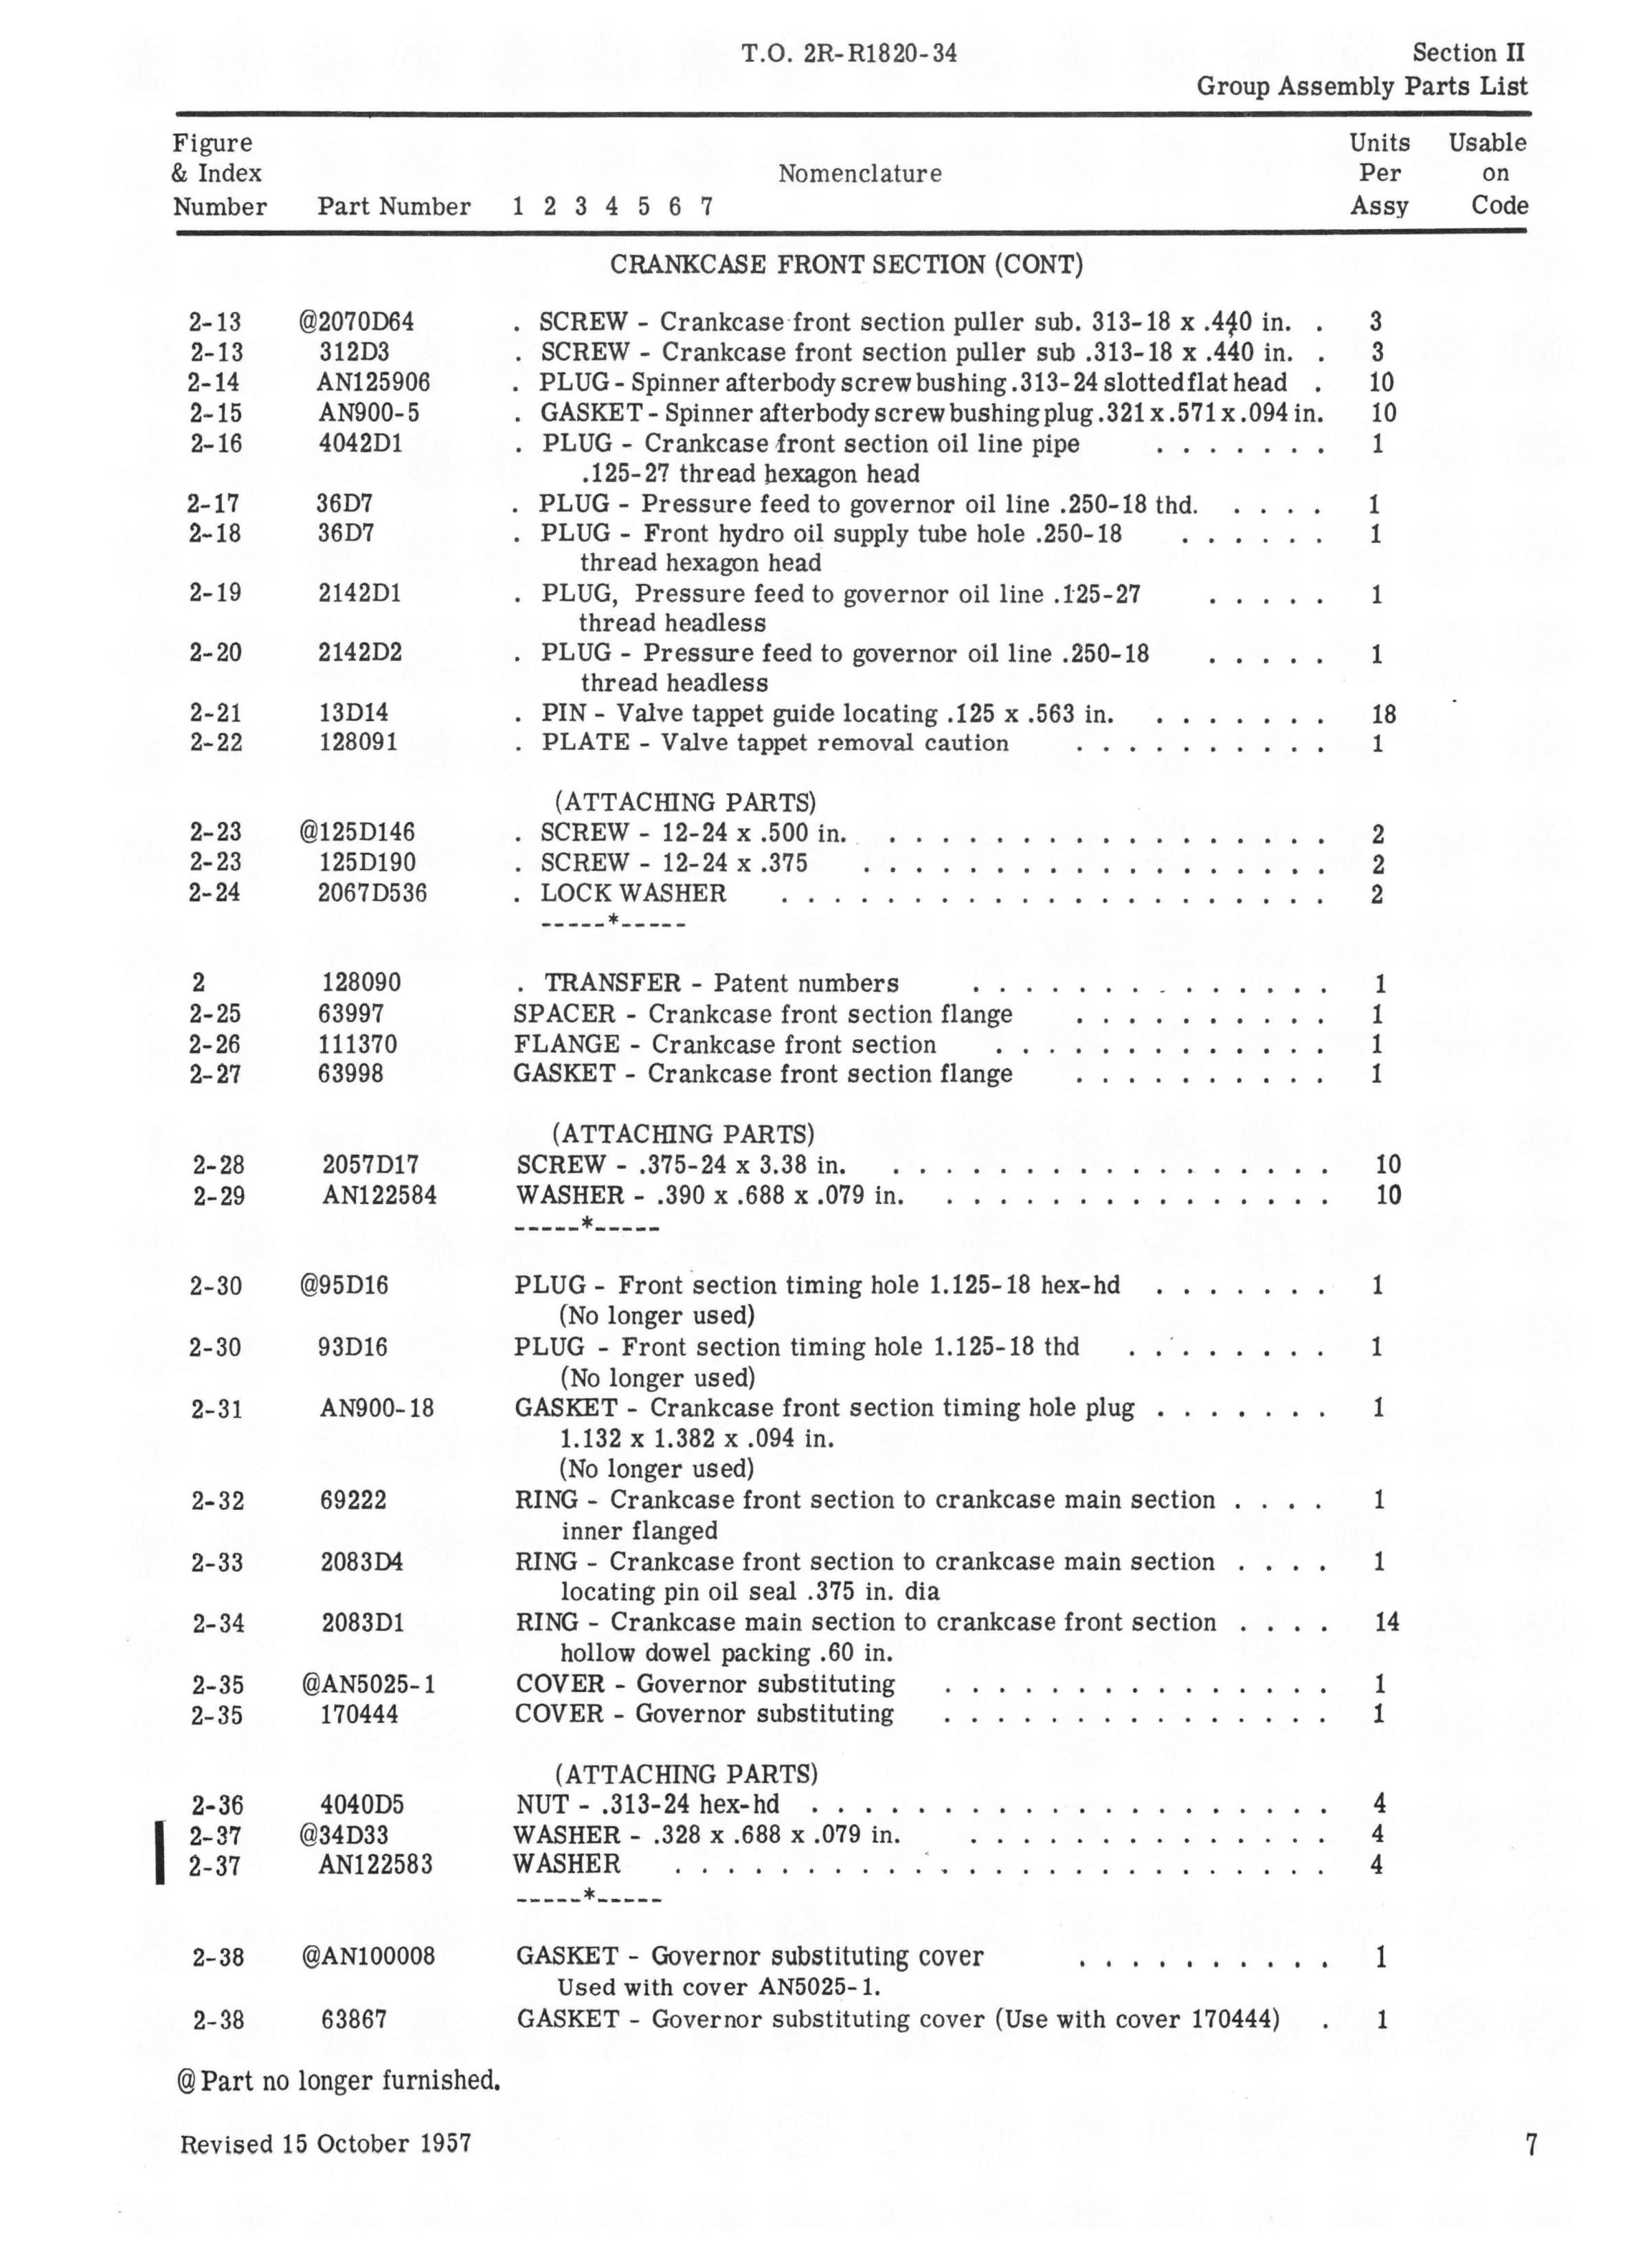 Sample page 11 from AirCorps Library document: Illustrated Parts Breakdown for Model R-1820-103 Engine